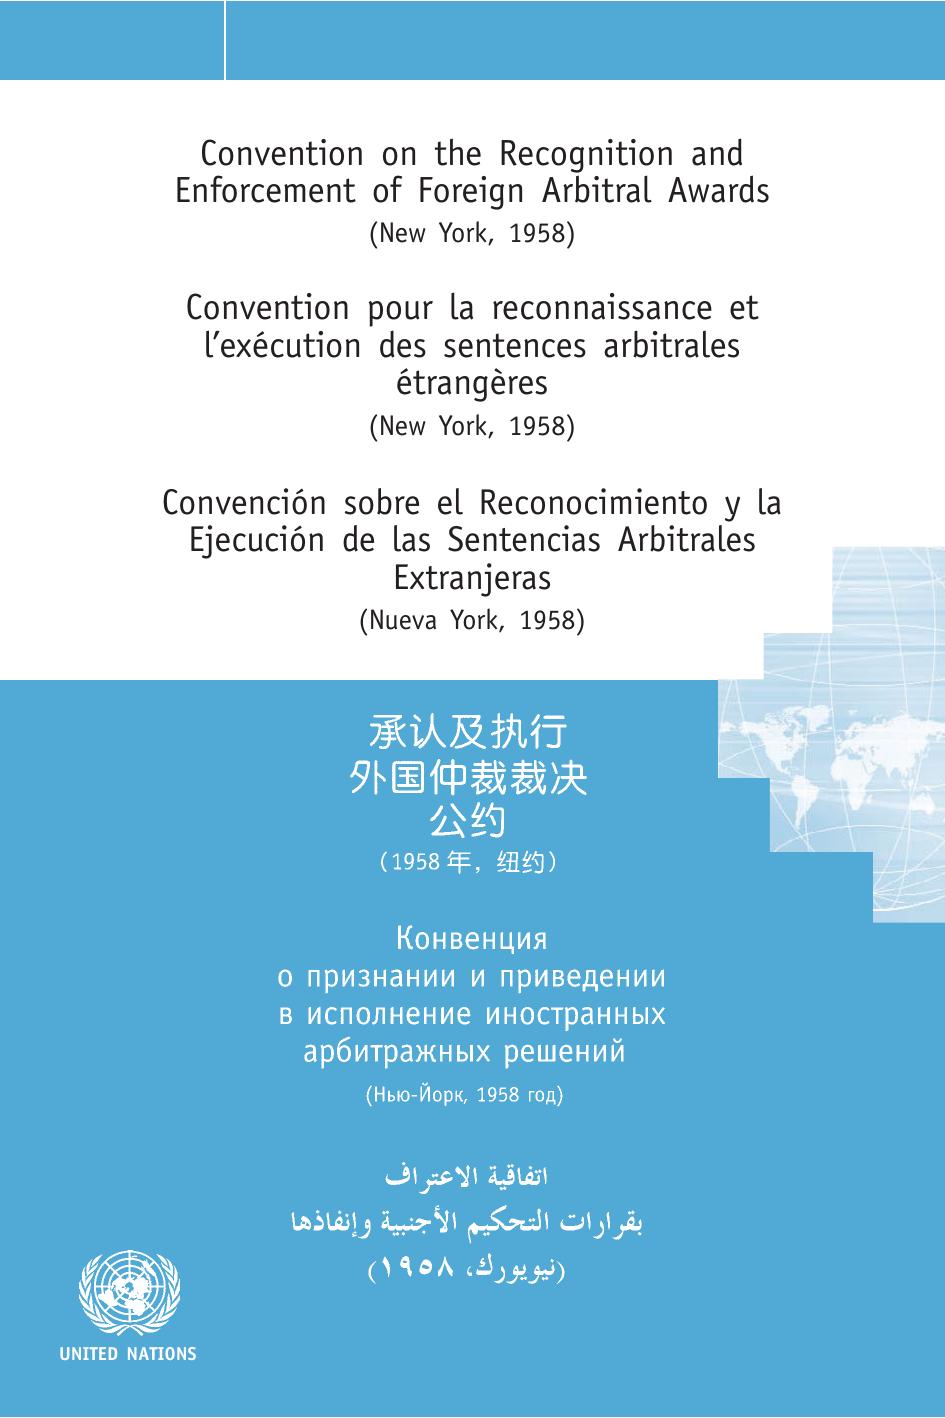 Convention on the Recognition and Enforcement of Foreign Arbitral Awards by United Nations Publications 2008